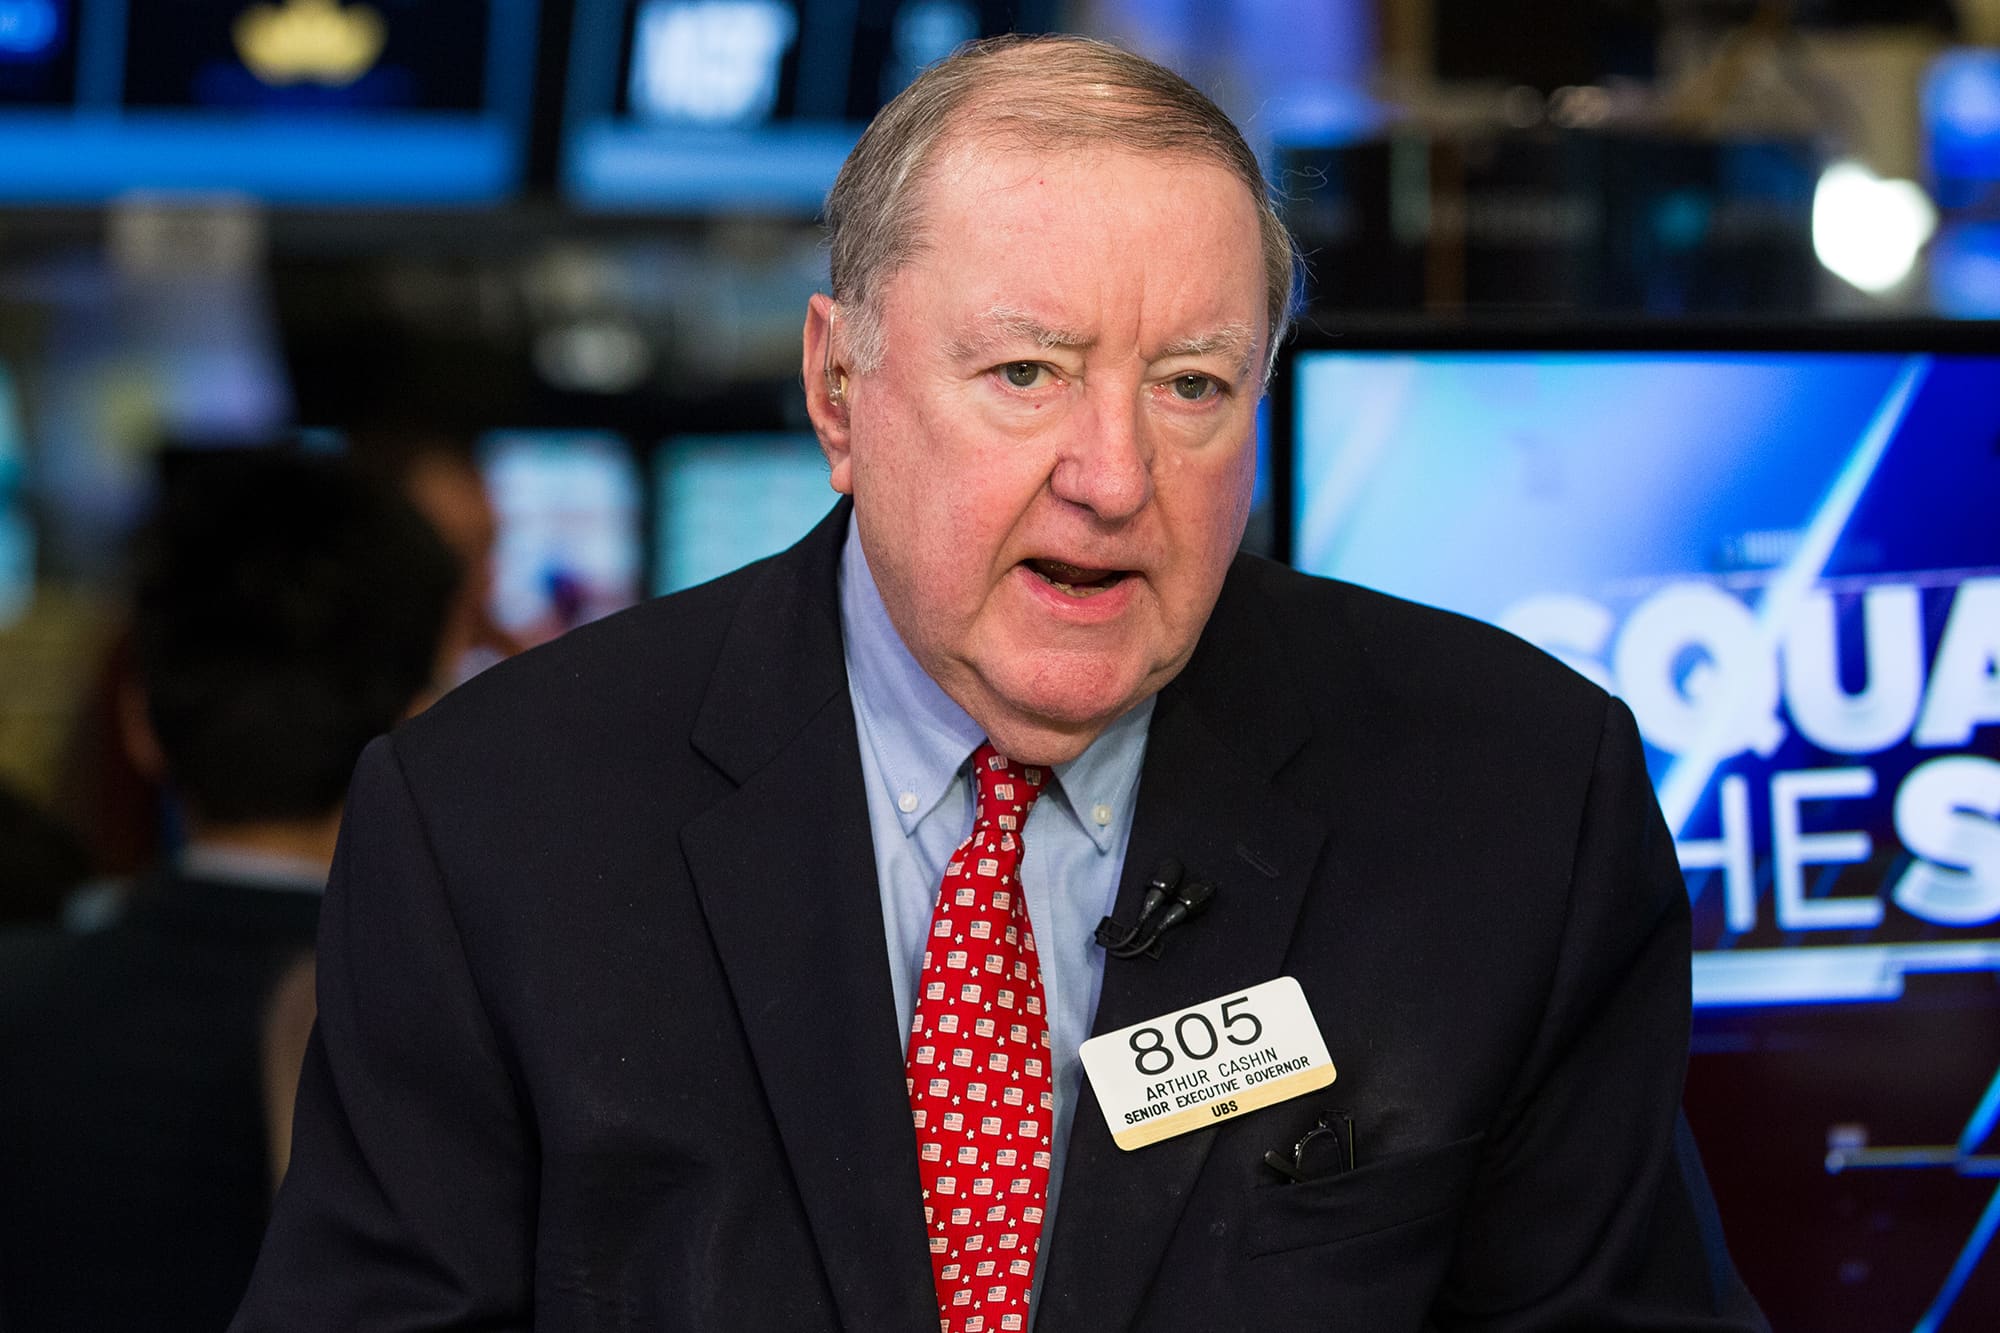 UBS' Art Cashin says this is the next key level to watch for the S&P 500